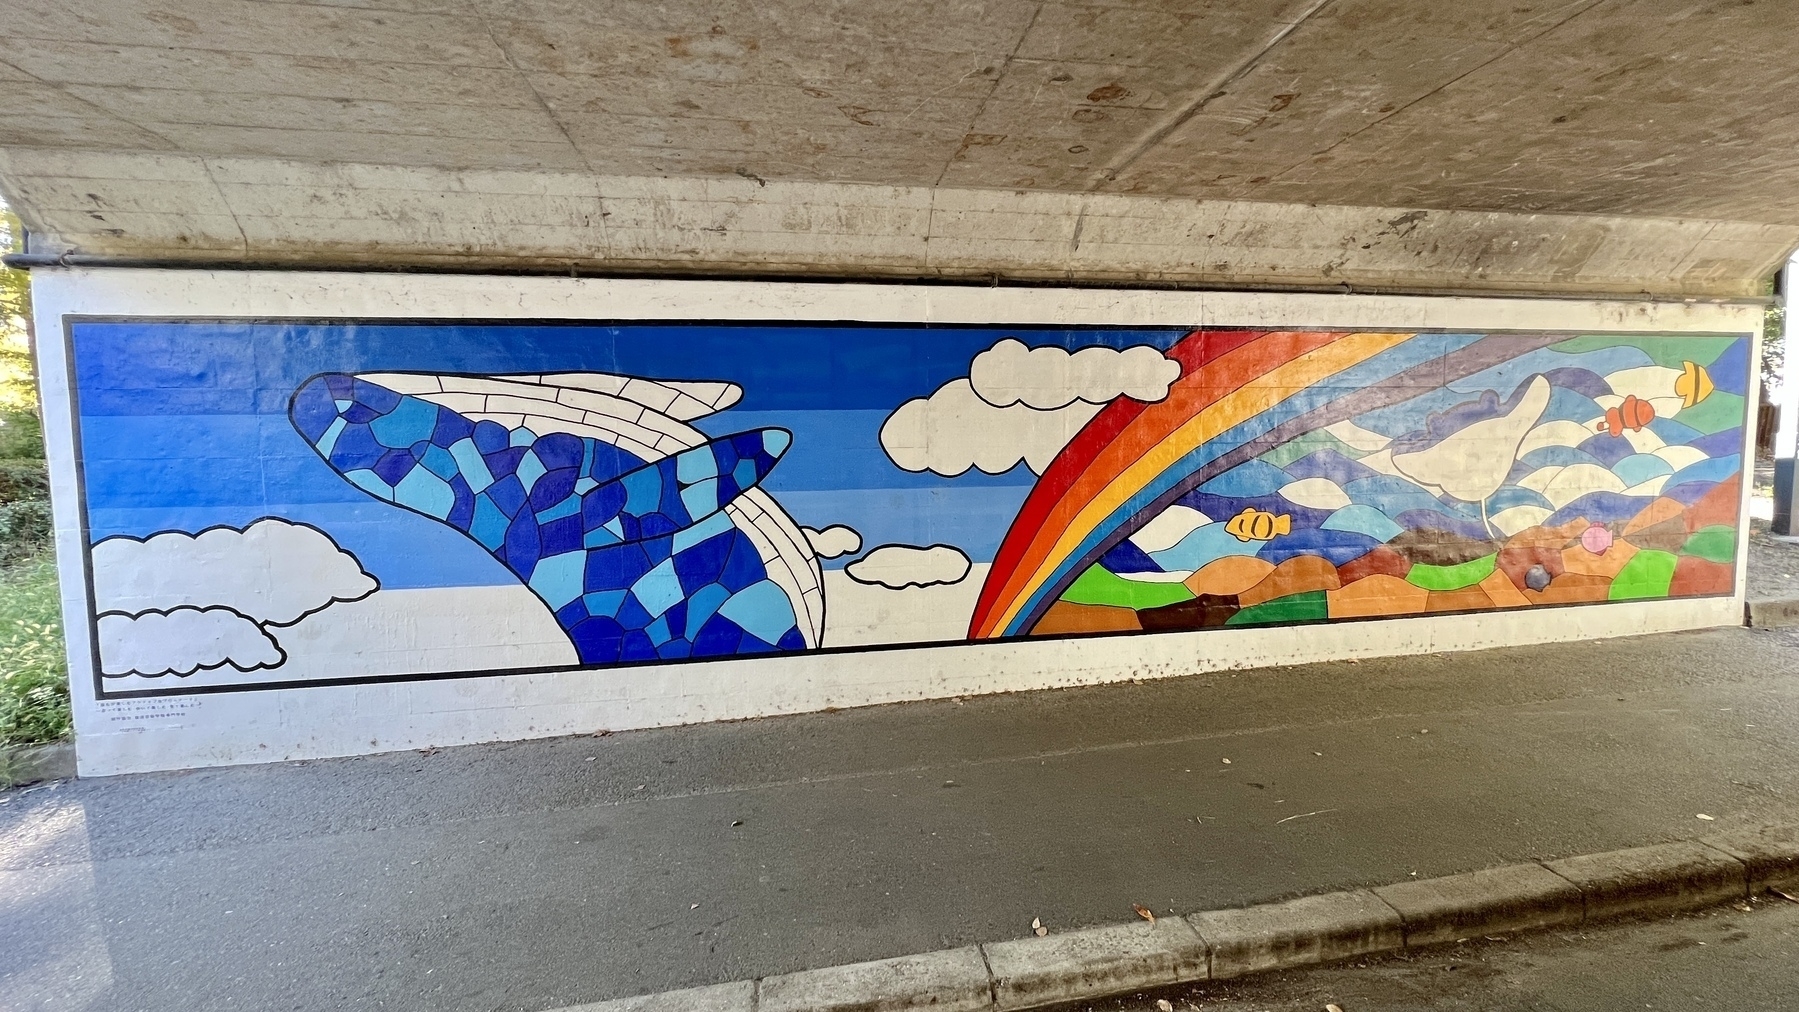 Wall mural depicting a leaping blue whale, rainbow, and other sea life